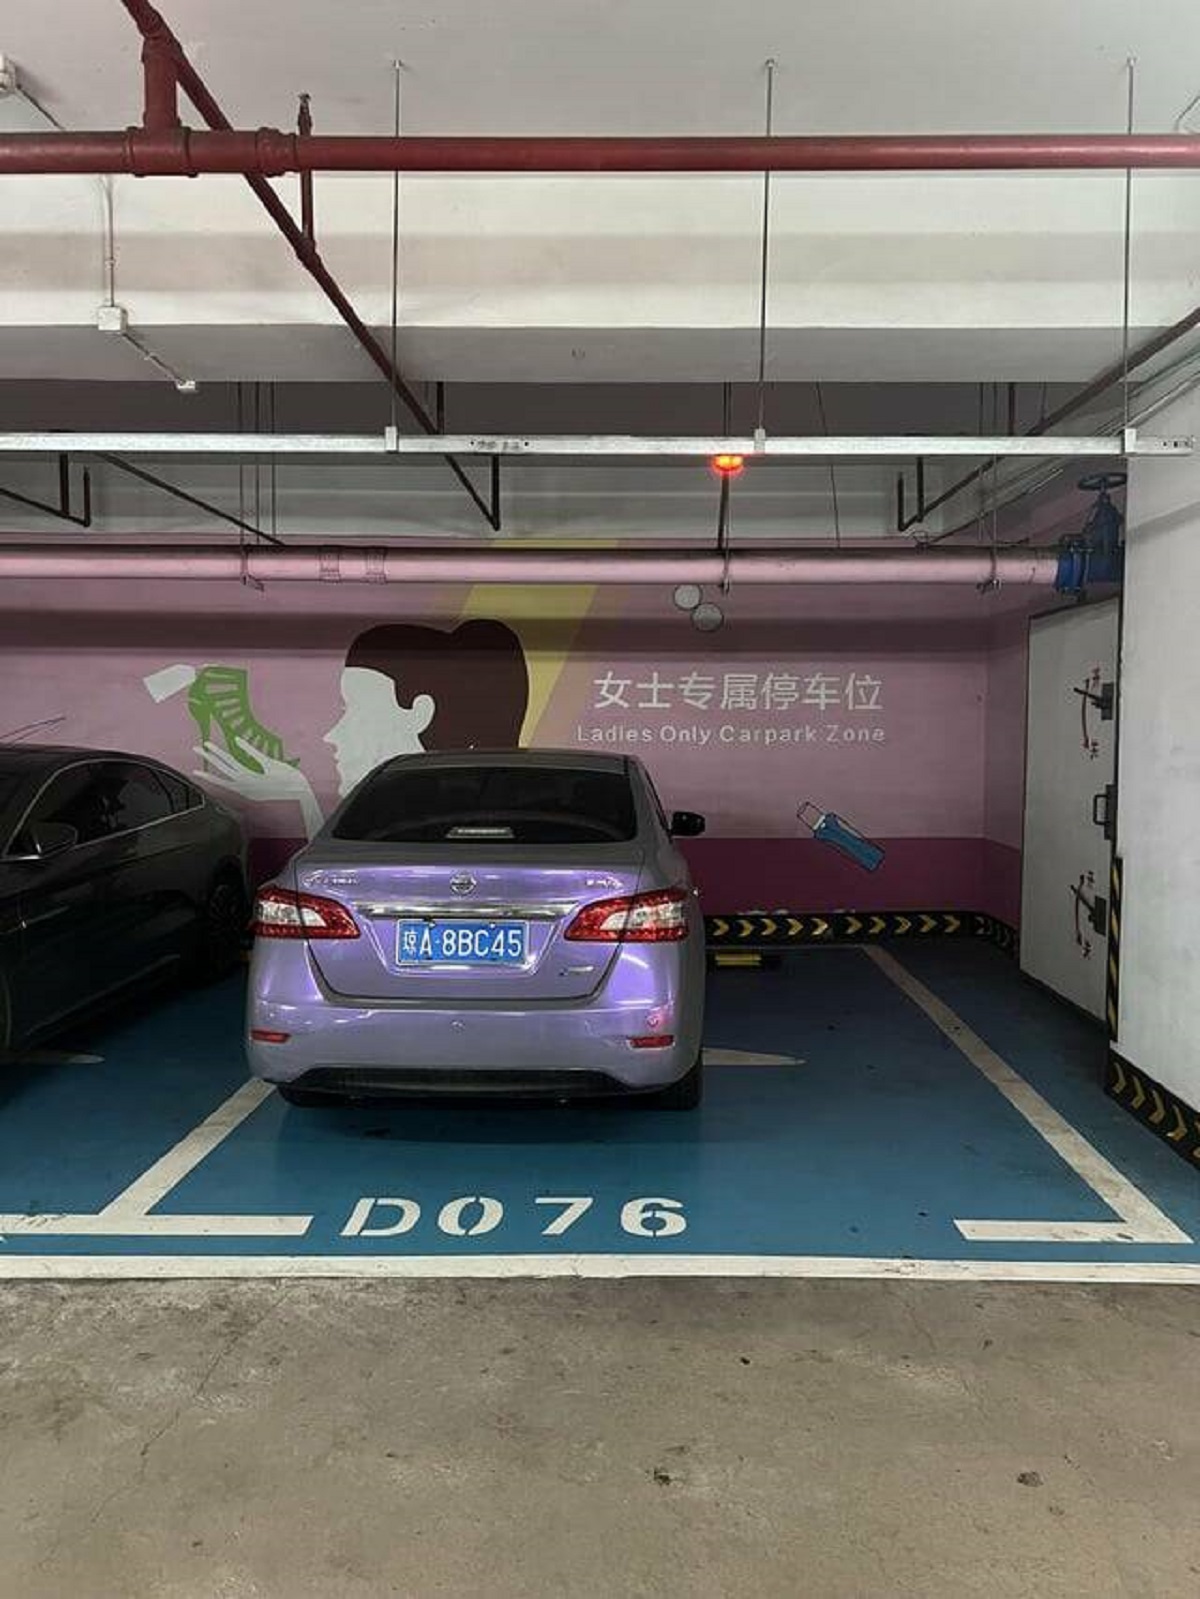 "In China they have women only parking spaces that are made bigger"